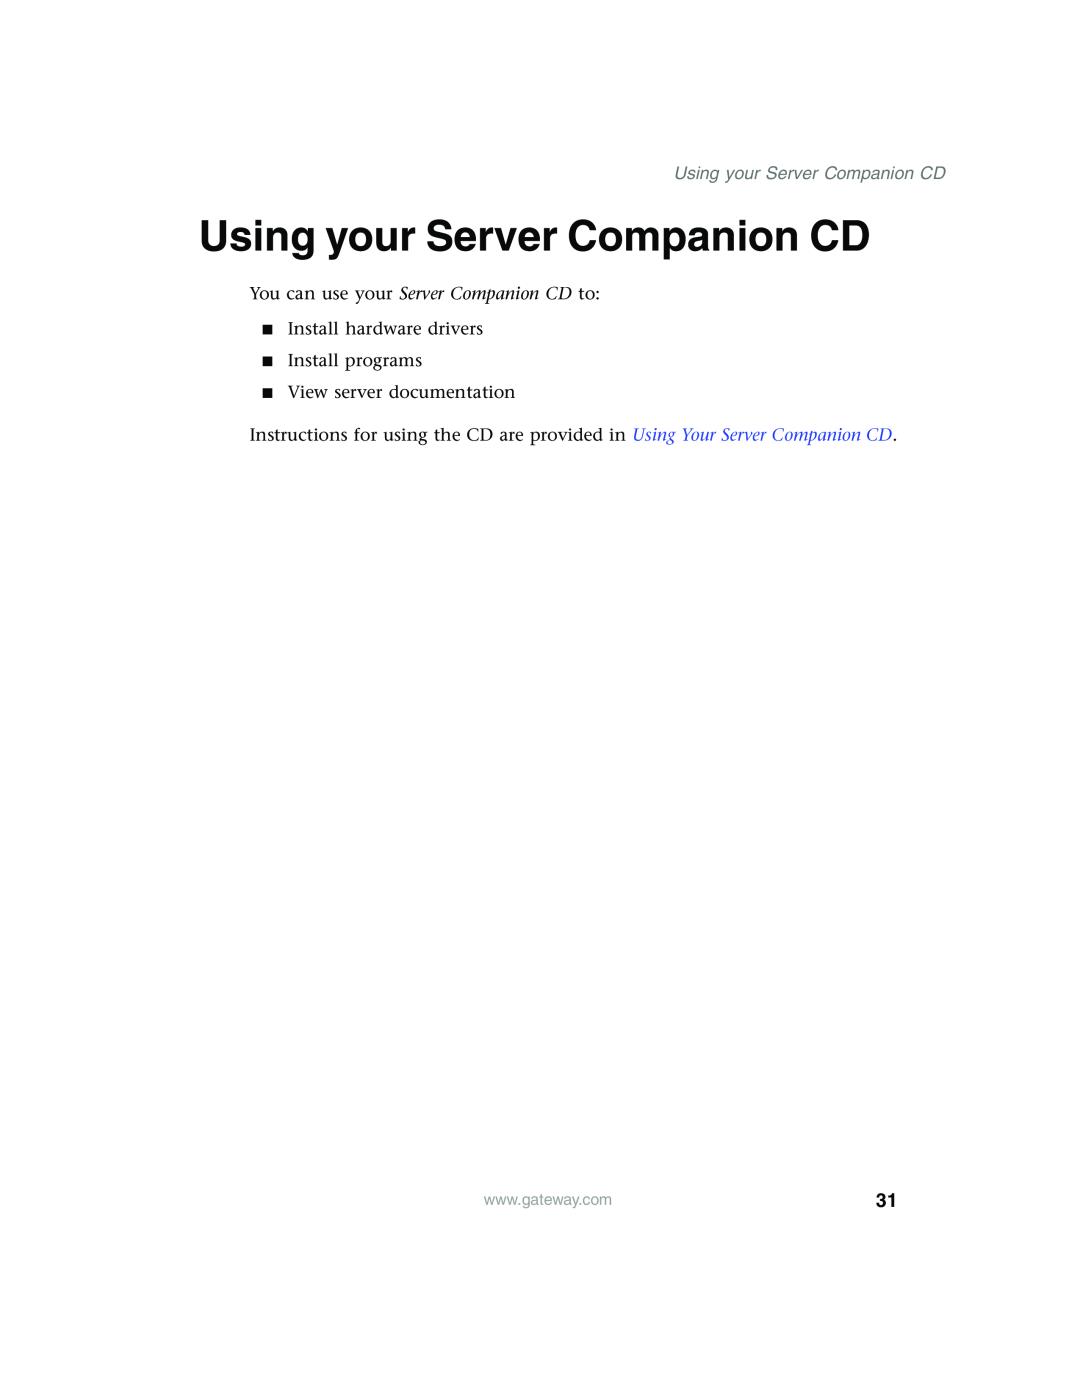 Gateway 955 manual Using your Server Companion CD, You can use your Server Companion CD to Install hardware drivers 